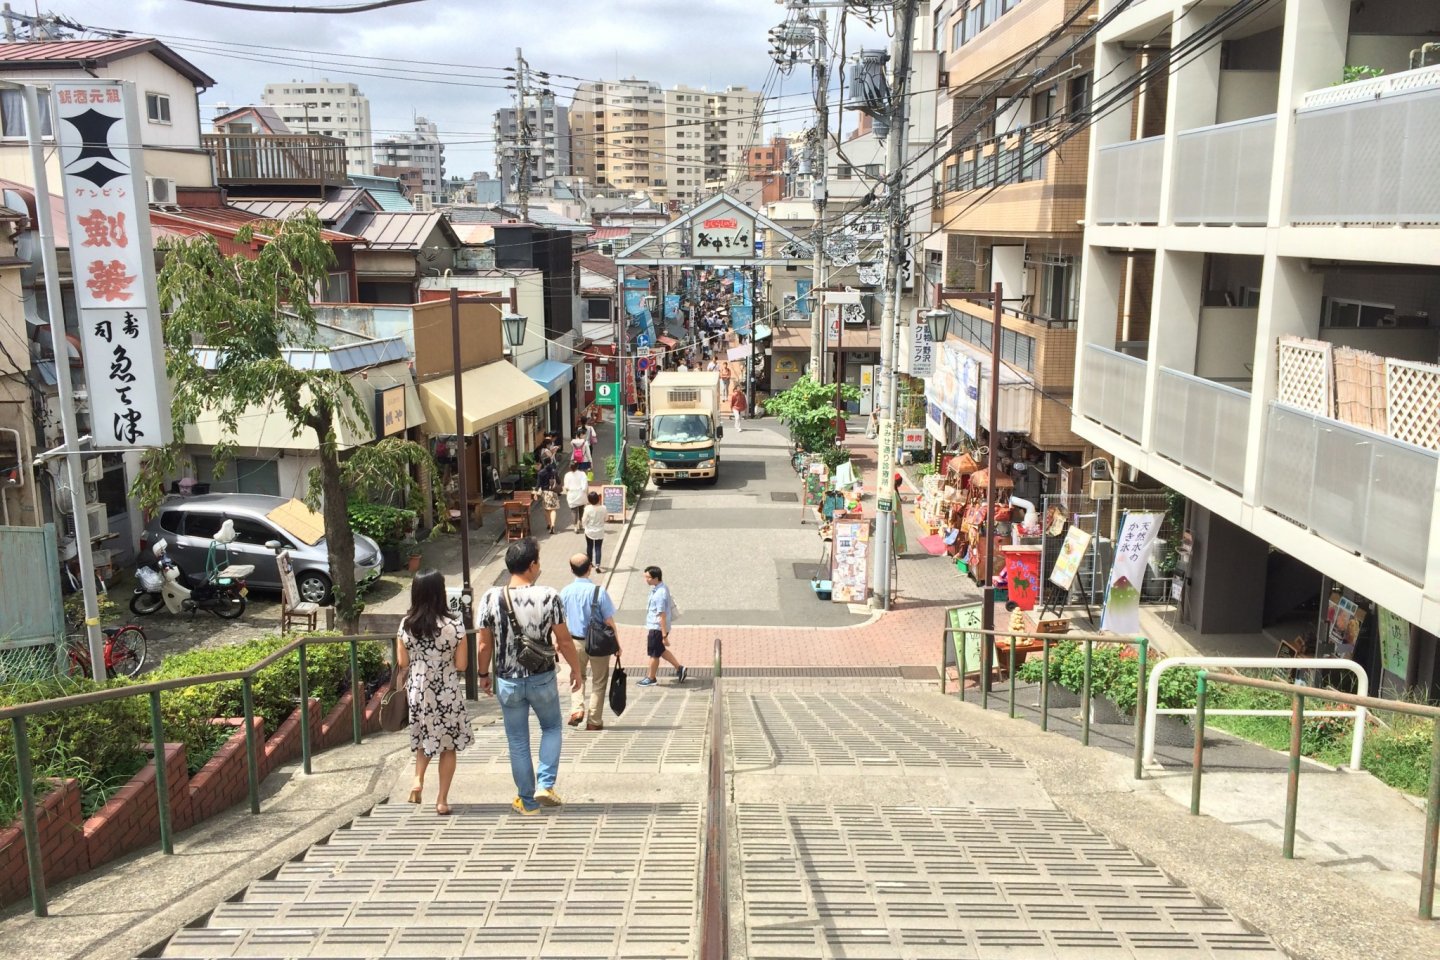 Just a walk down the stairs - The shopping street Yanaka Ginza entrance is welcoming you